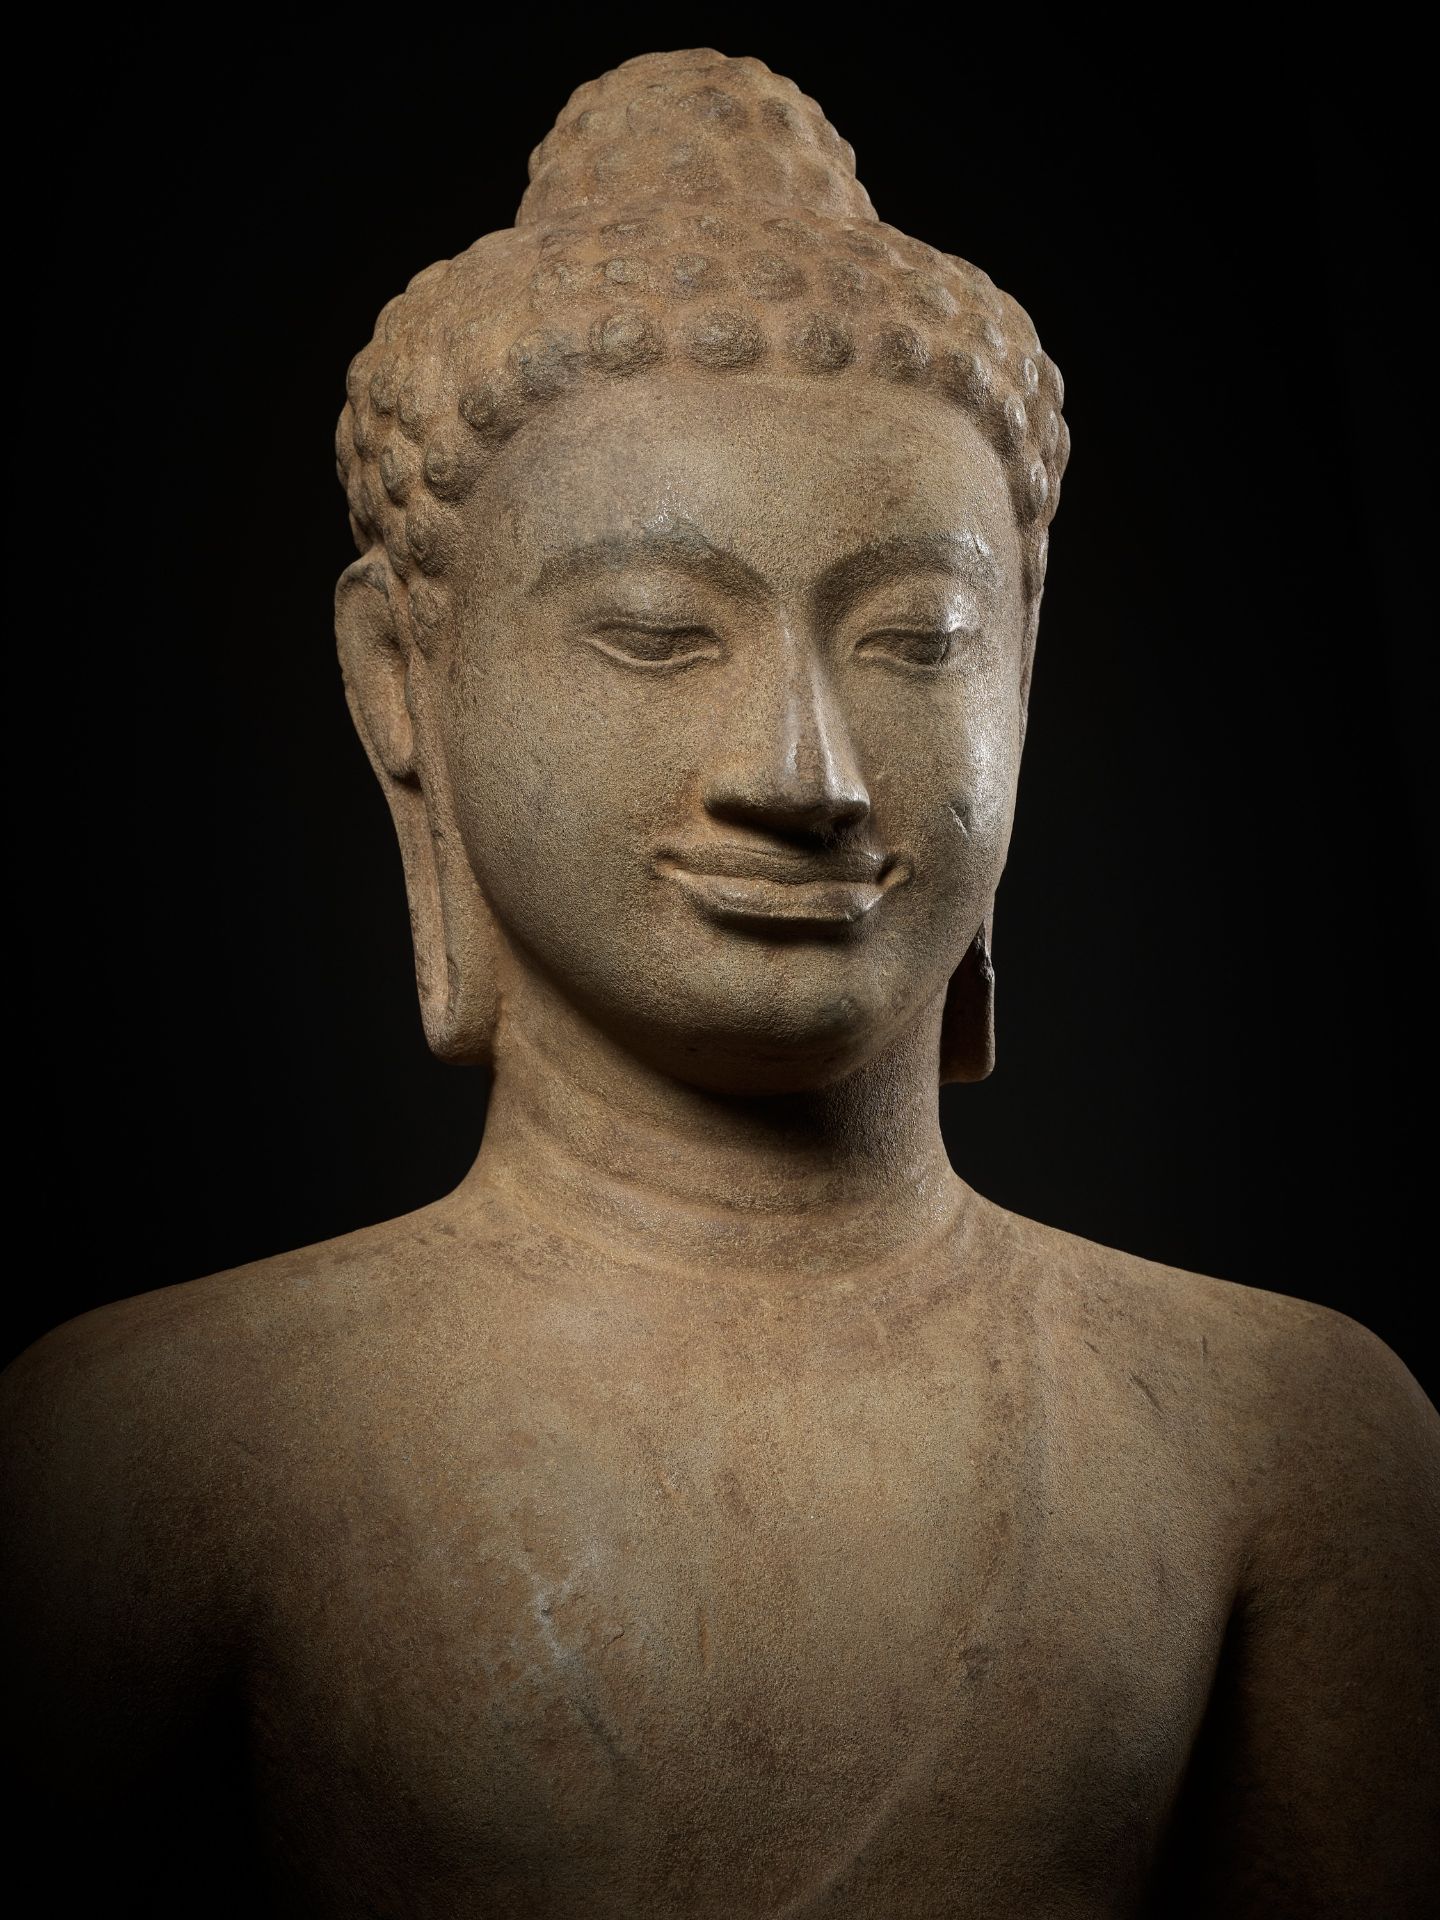 A MONUMENTAL AND HIGHLY IMPORTANT SANDSTONE FIGURE OF BUDDHA, PRE-ANGKOR PERIOD